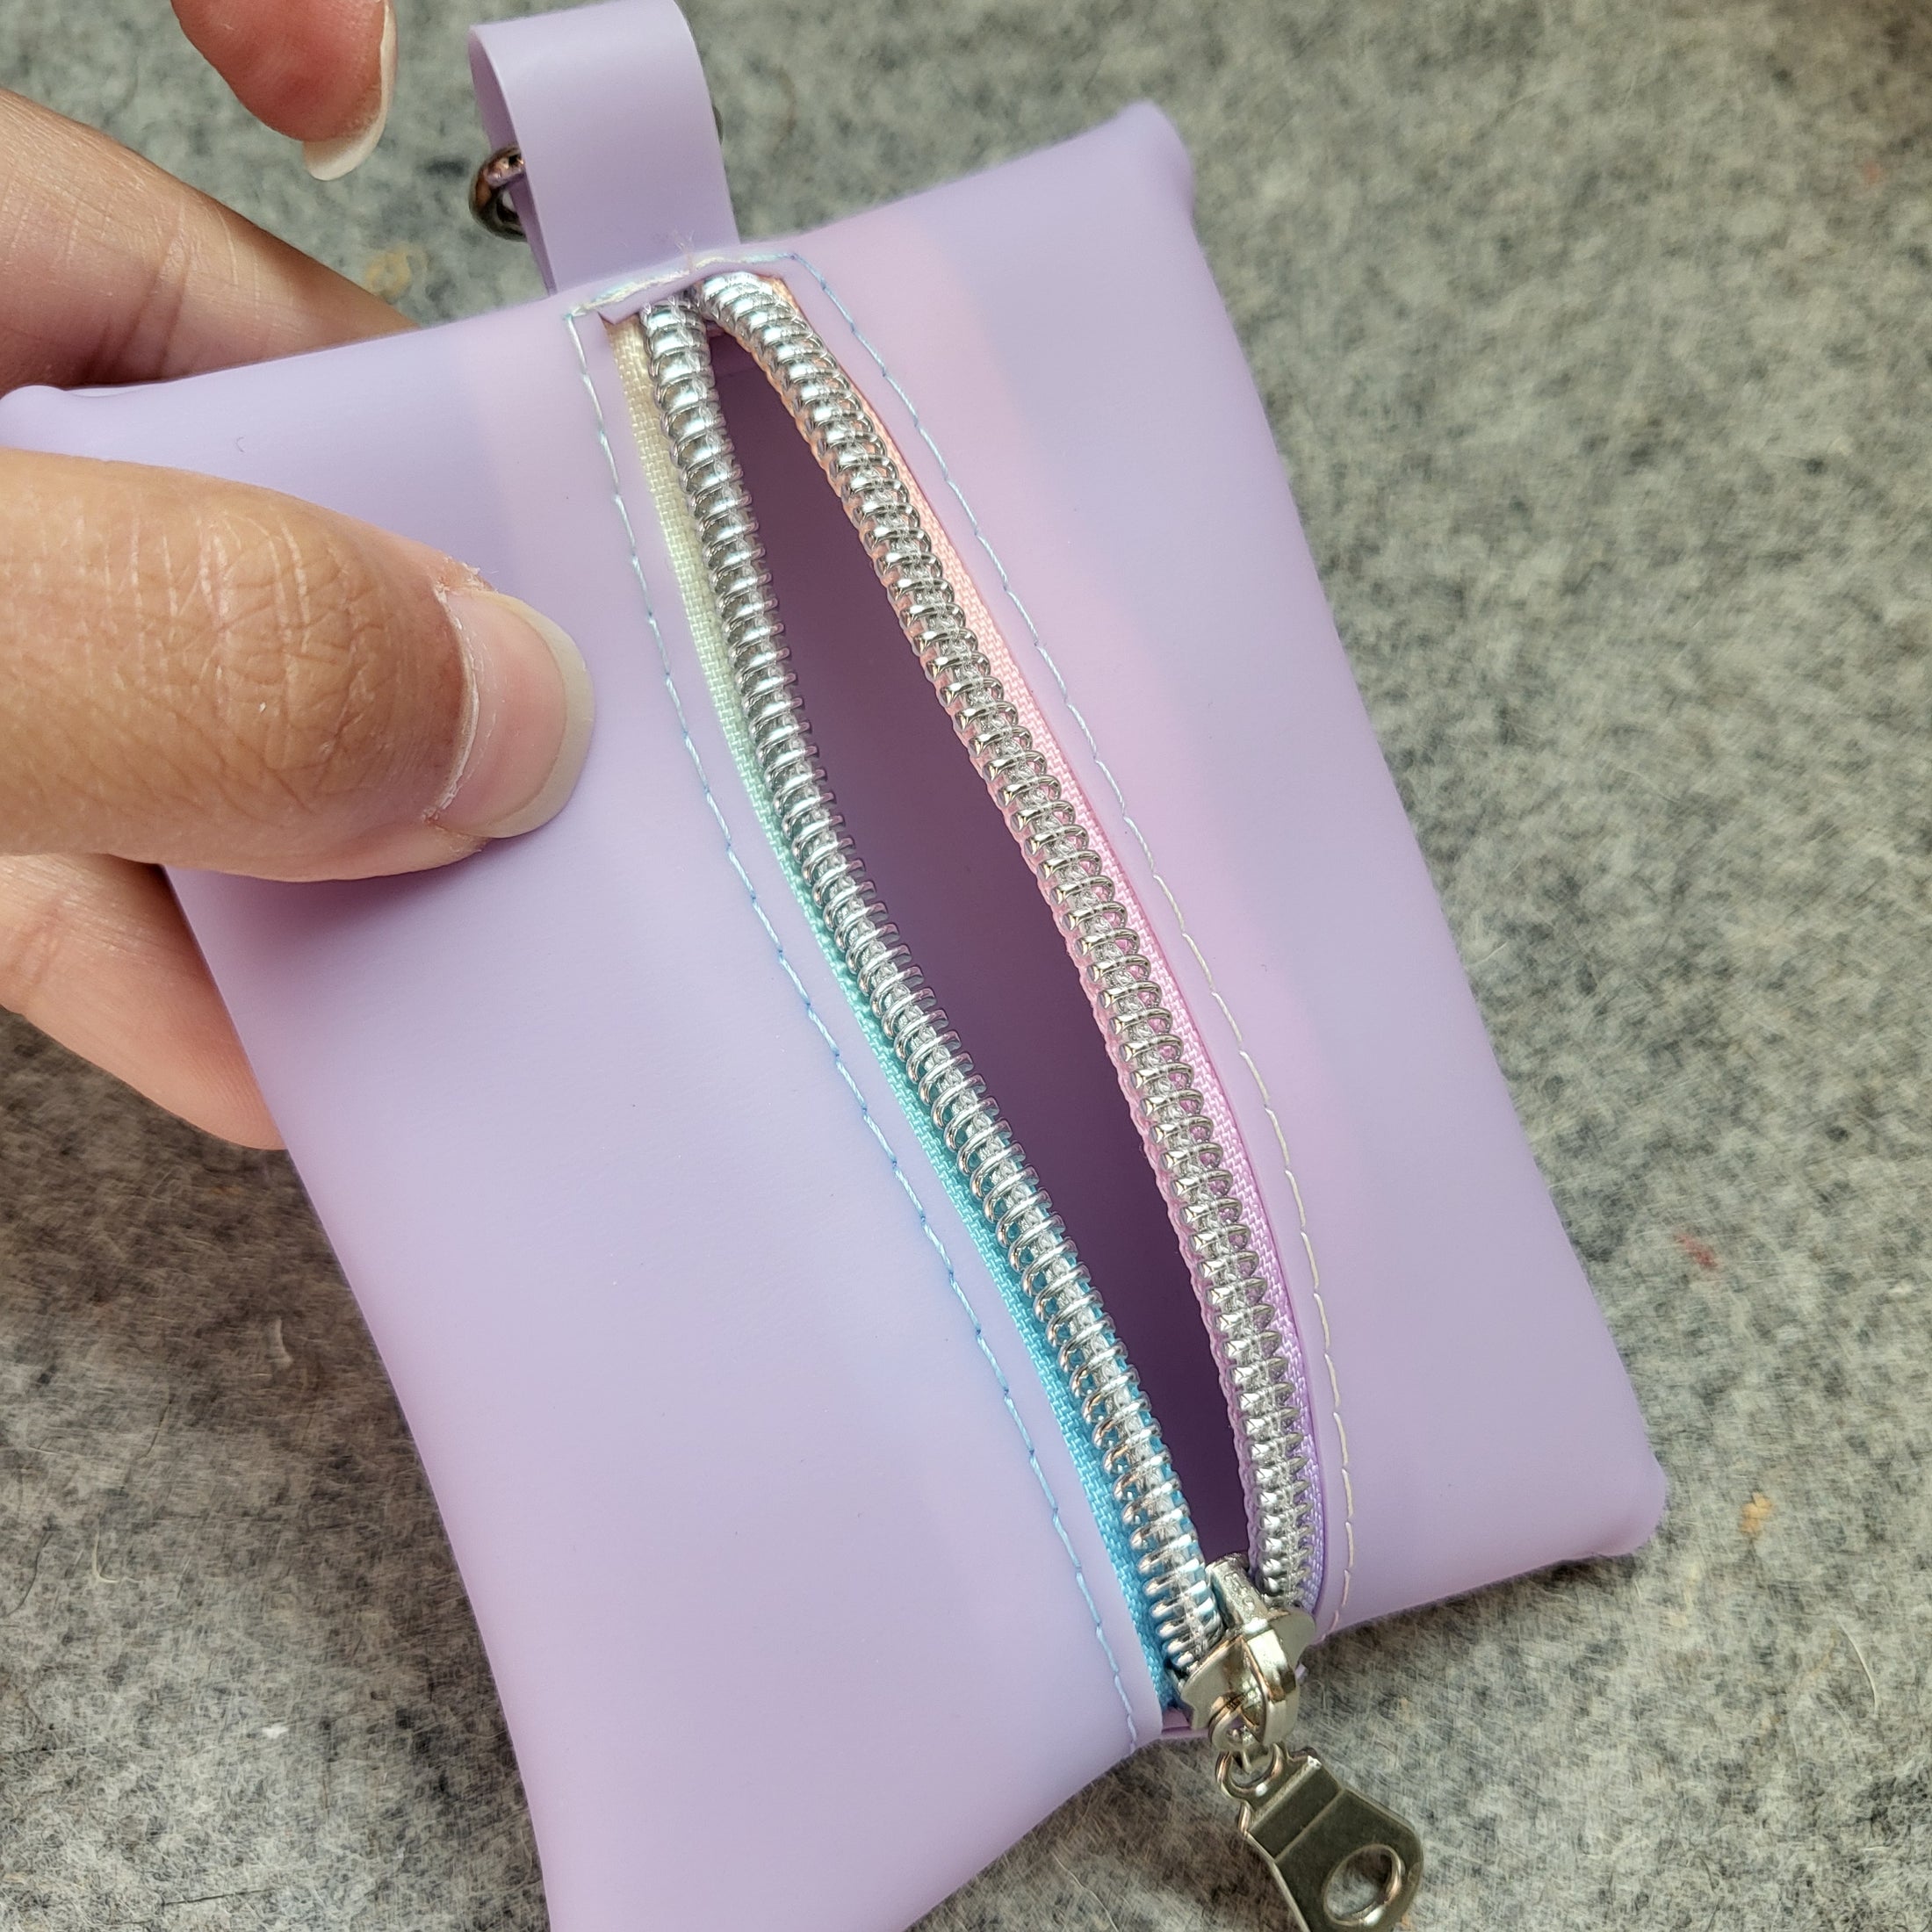 Light purple mini zipper pouch with rainbow zipper tape included with the Mario Kart inspired bag. 